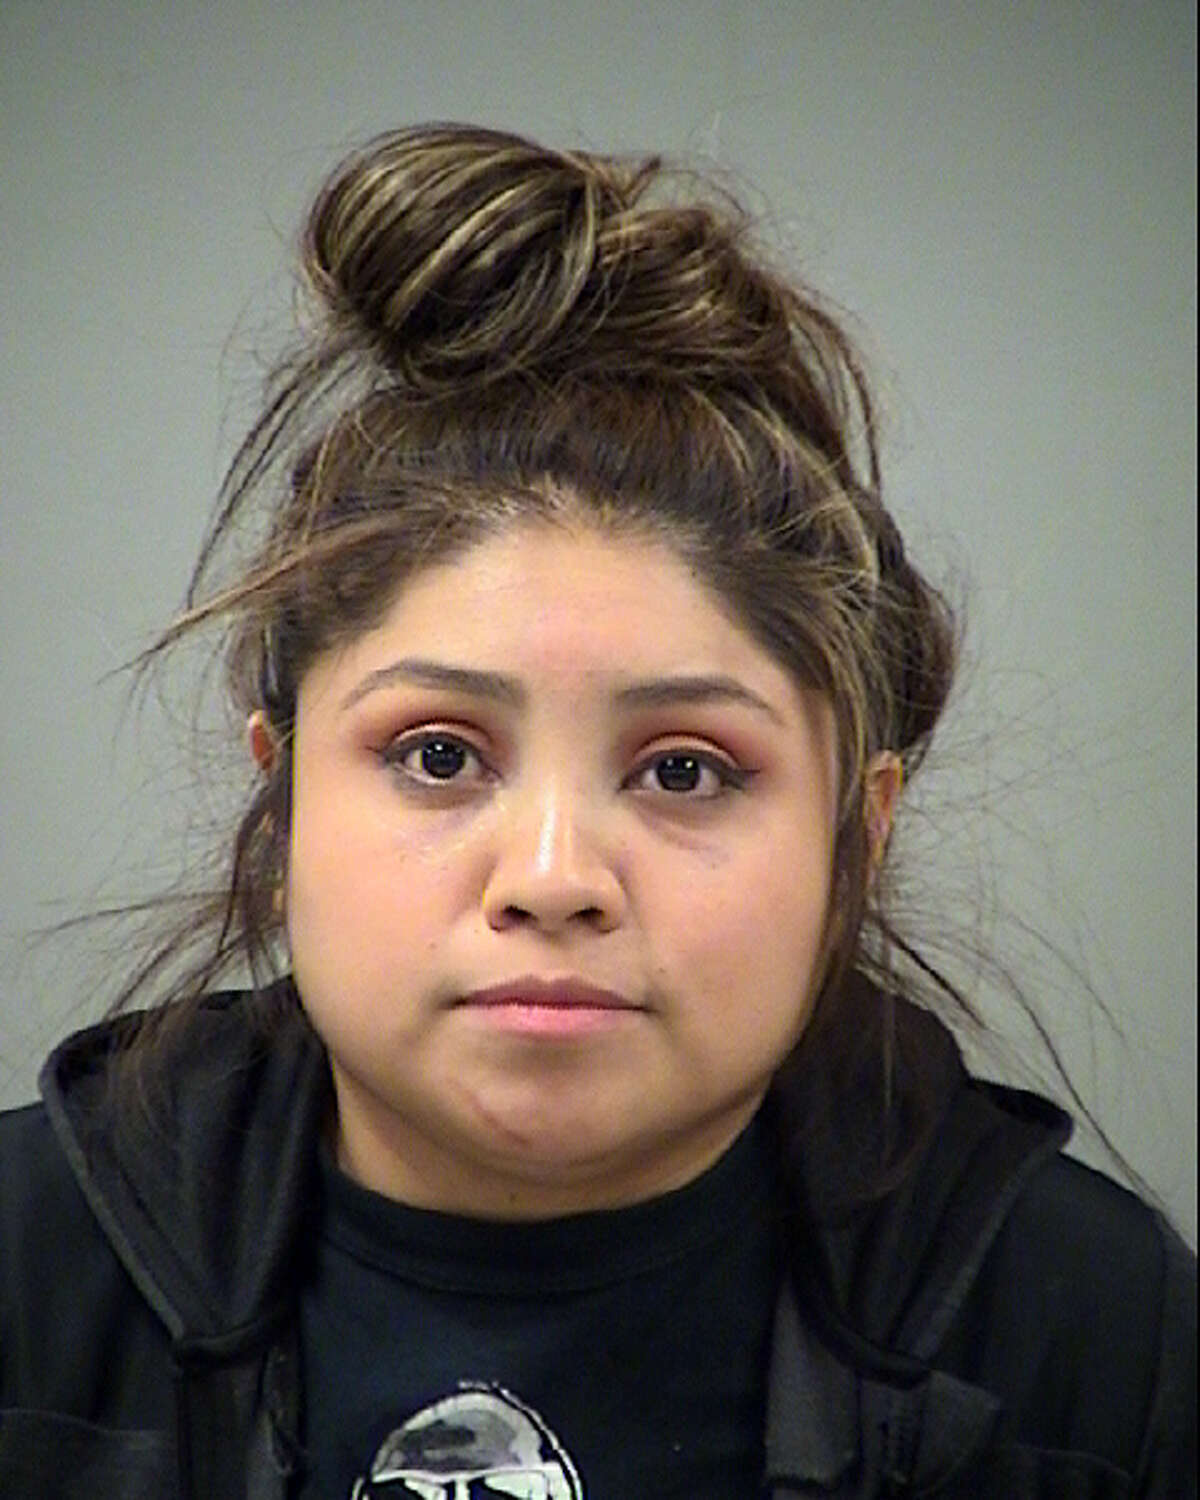 Star Perez, 27, is accused of aggravated assault with a deadly weapon.